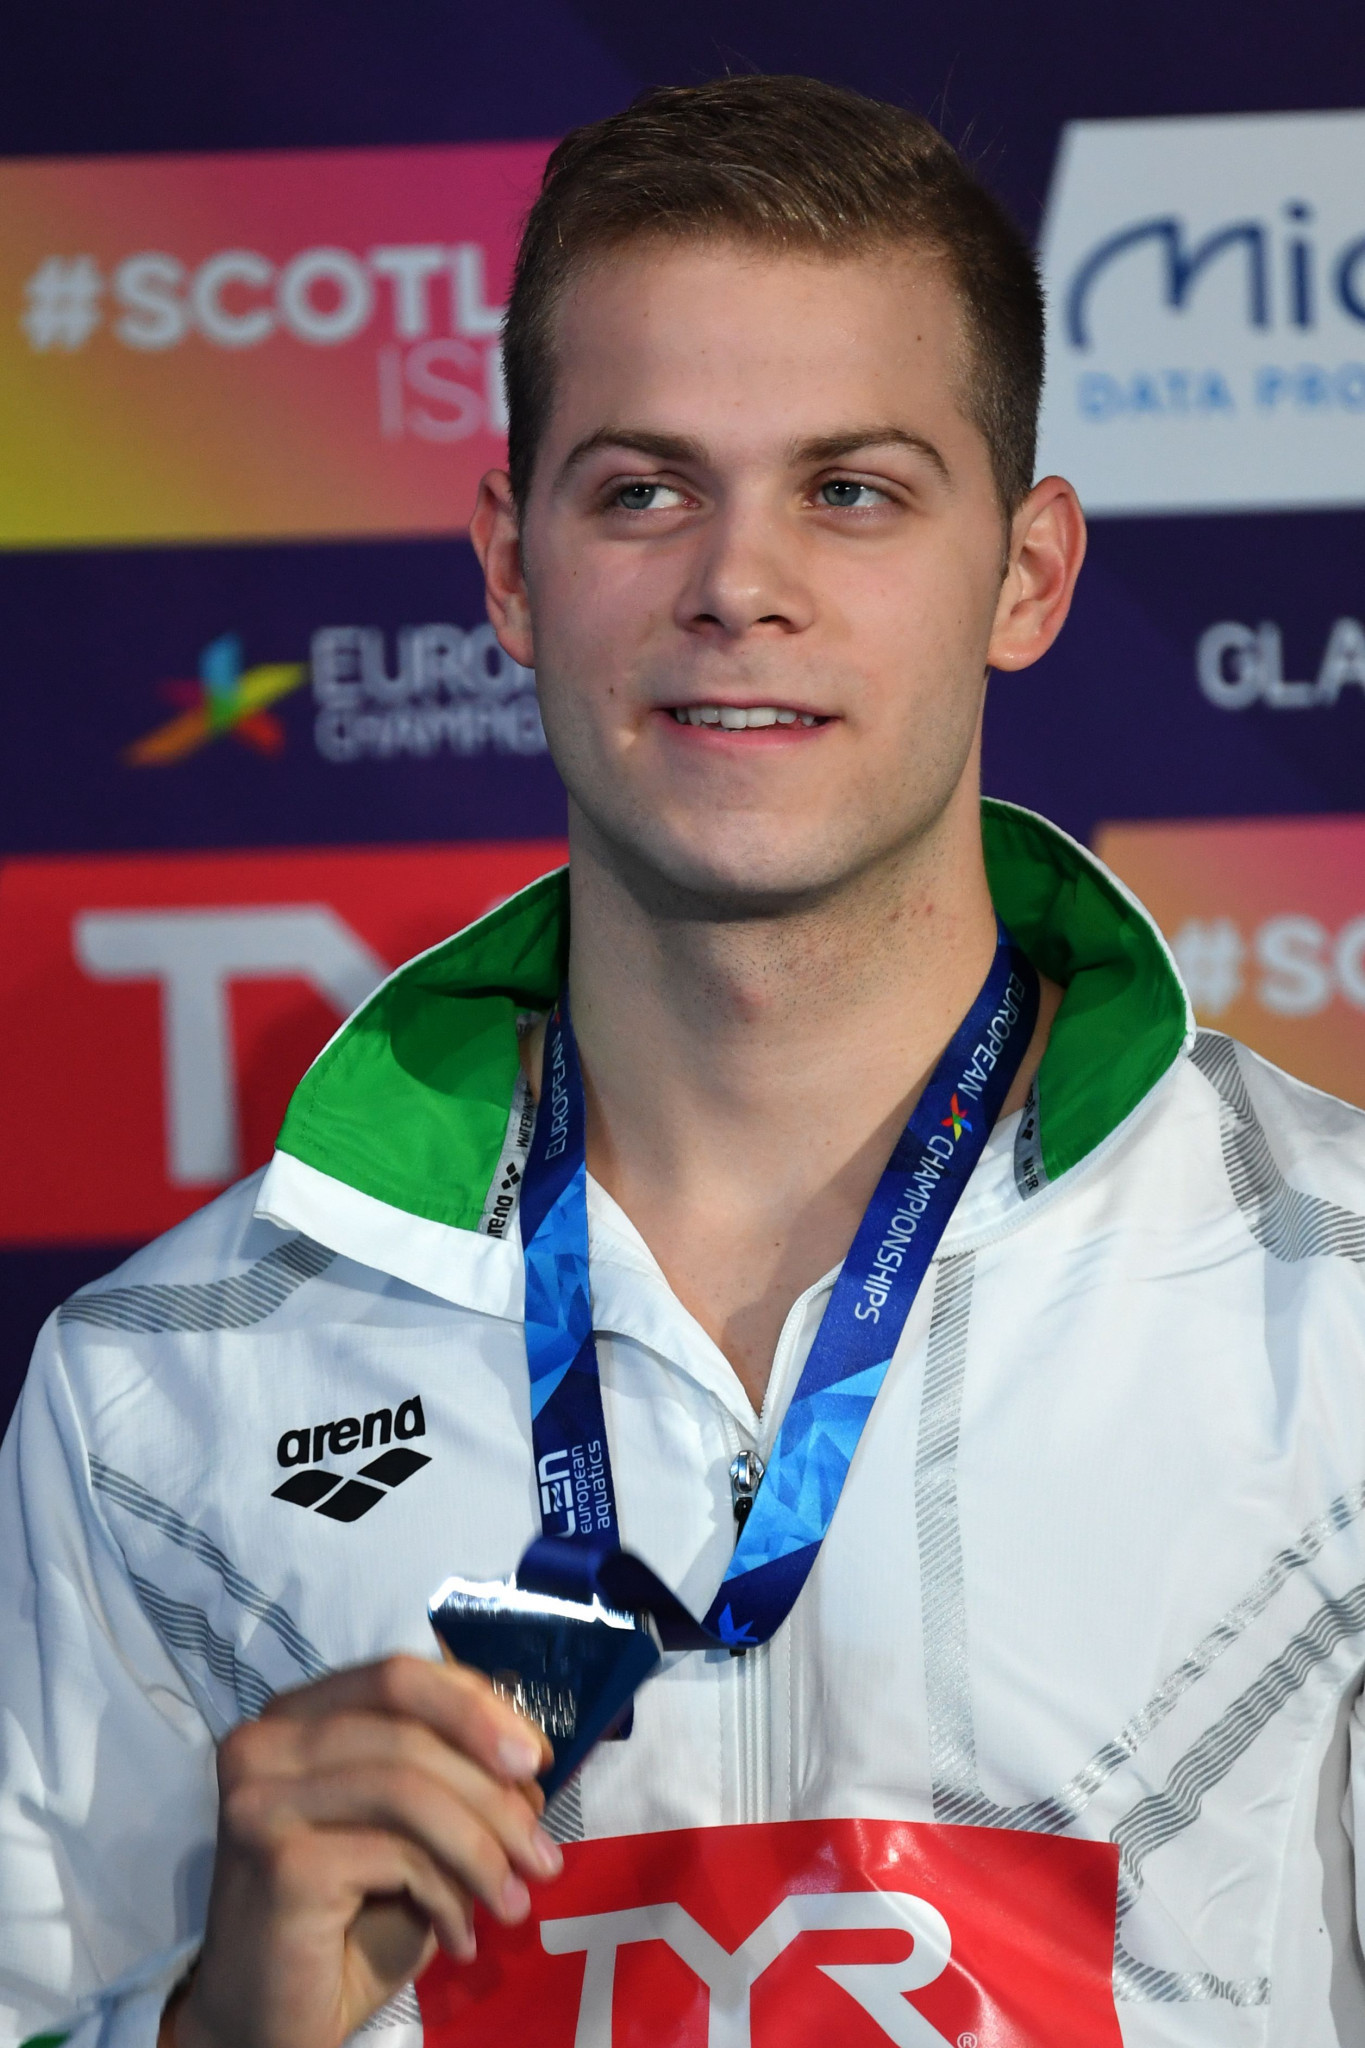 Hungarian swimmer Kenderesi arrested in Gwangju after sexual harassment allegations